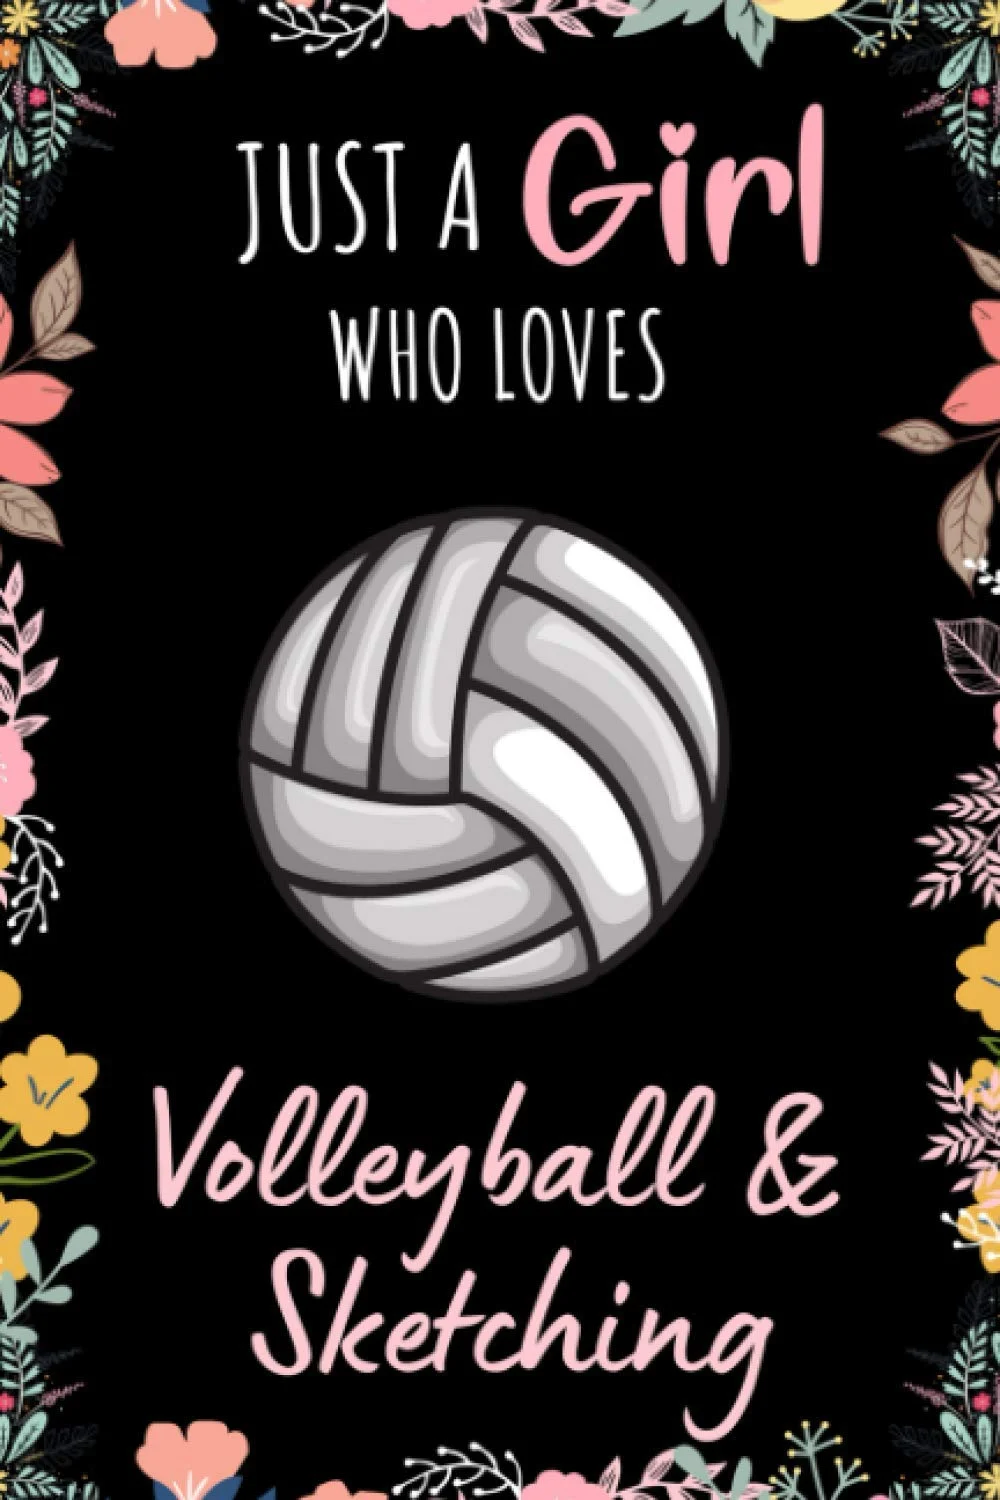 Just a girl who loves volleyball and sketching: Sketchbook, Drawing pad, Notebook, Journal, Doodle book, Gift for girls, women, volleyball lovers, 120 pages, 6x9 inches, Matte finish - Volleyball